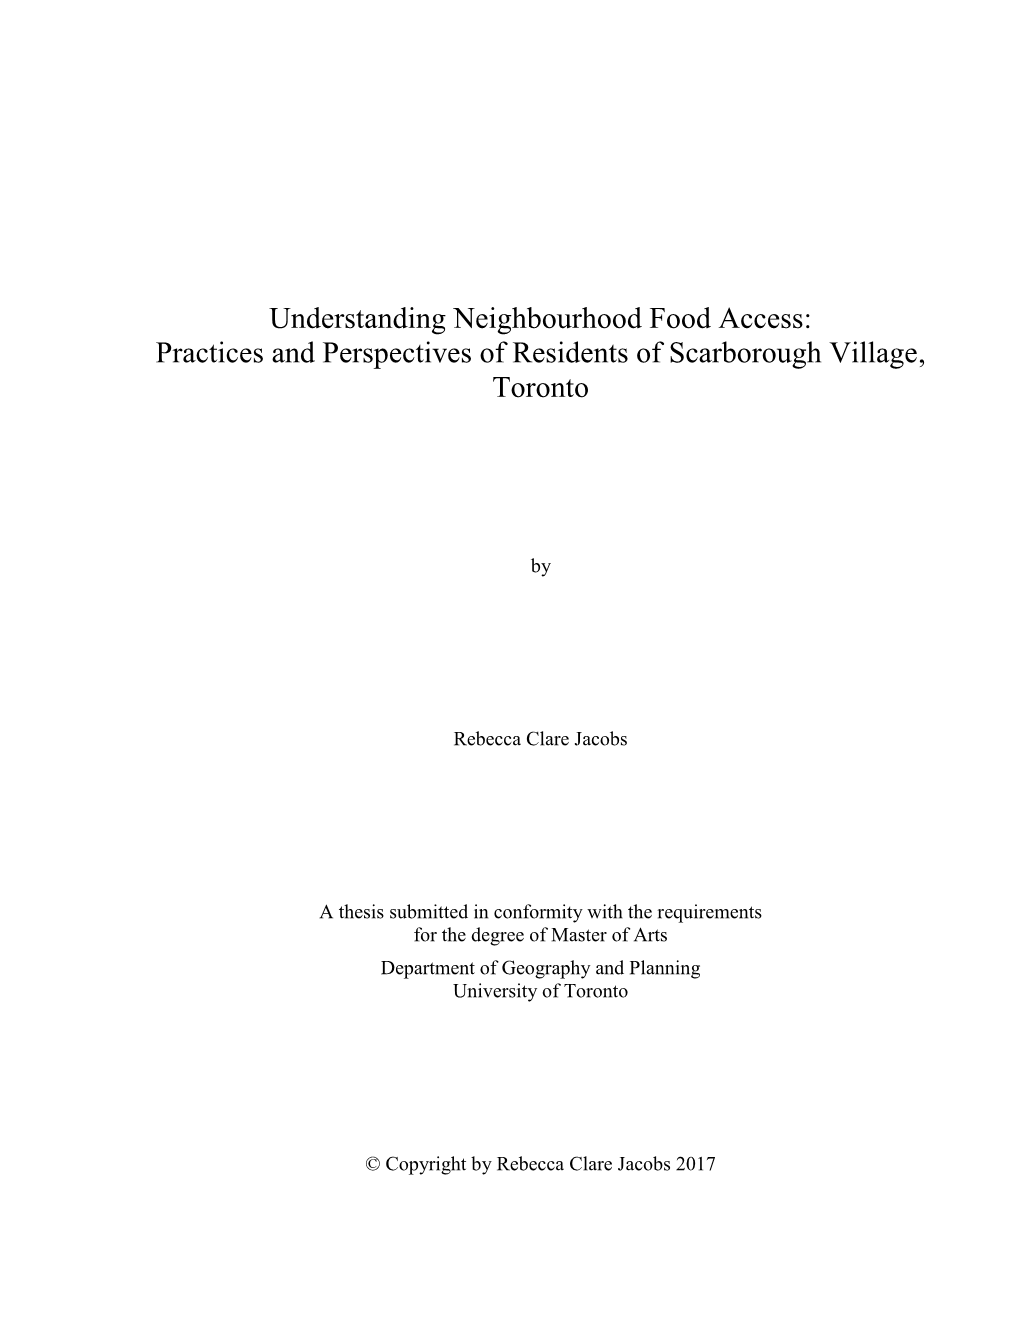 Understanding Neighbourhood Food Access: Practices and Perspectives of Residents of Scarborough Village, Toronto